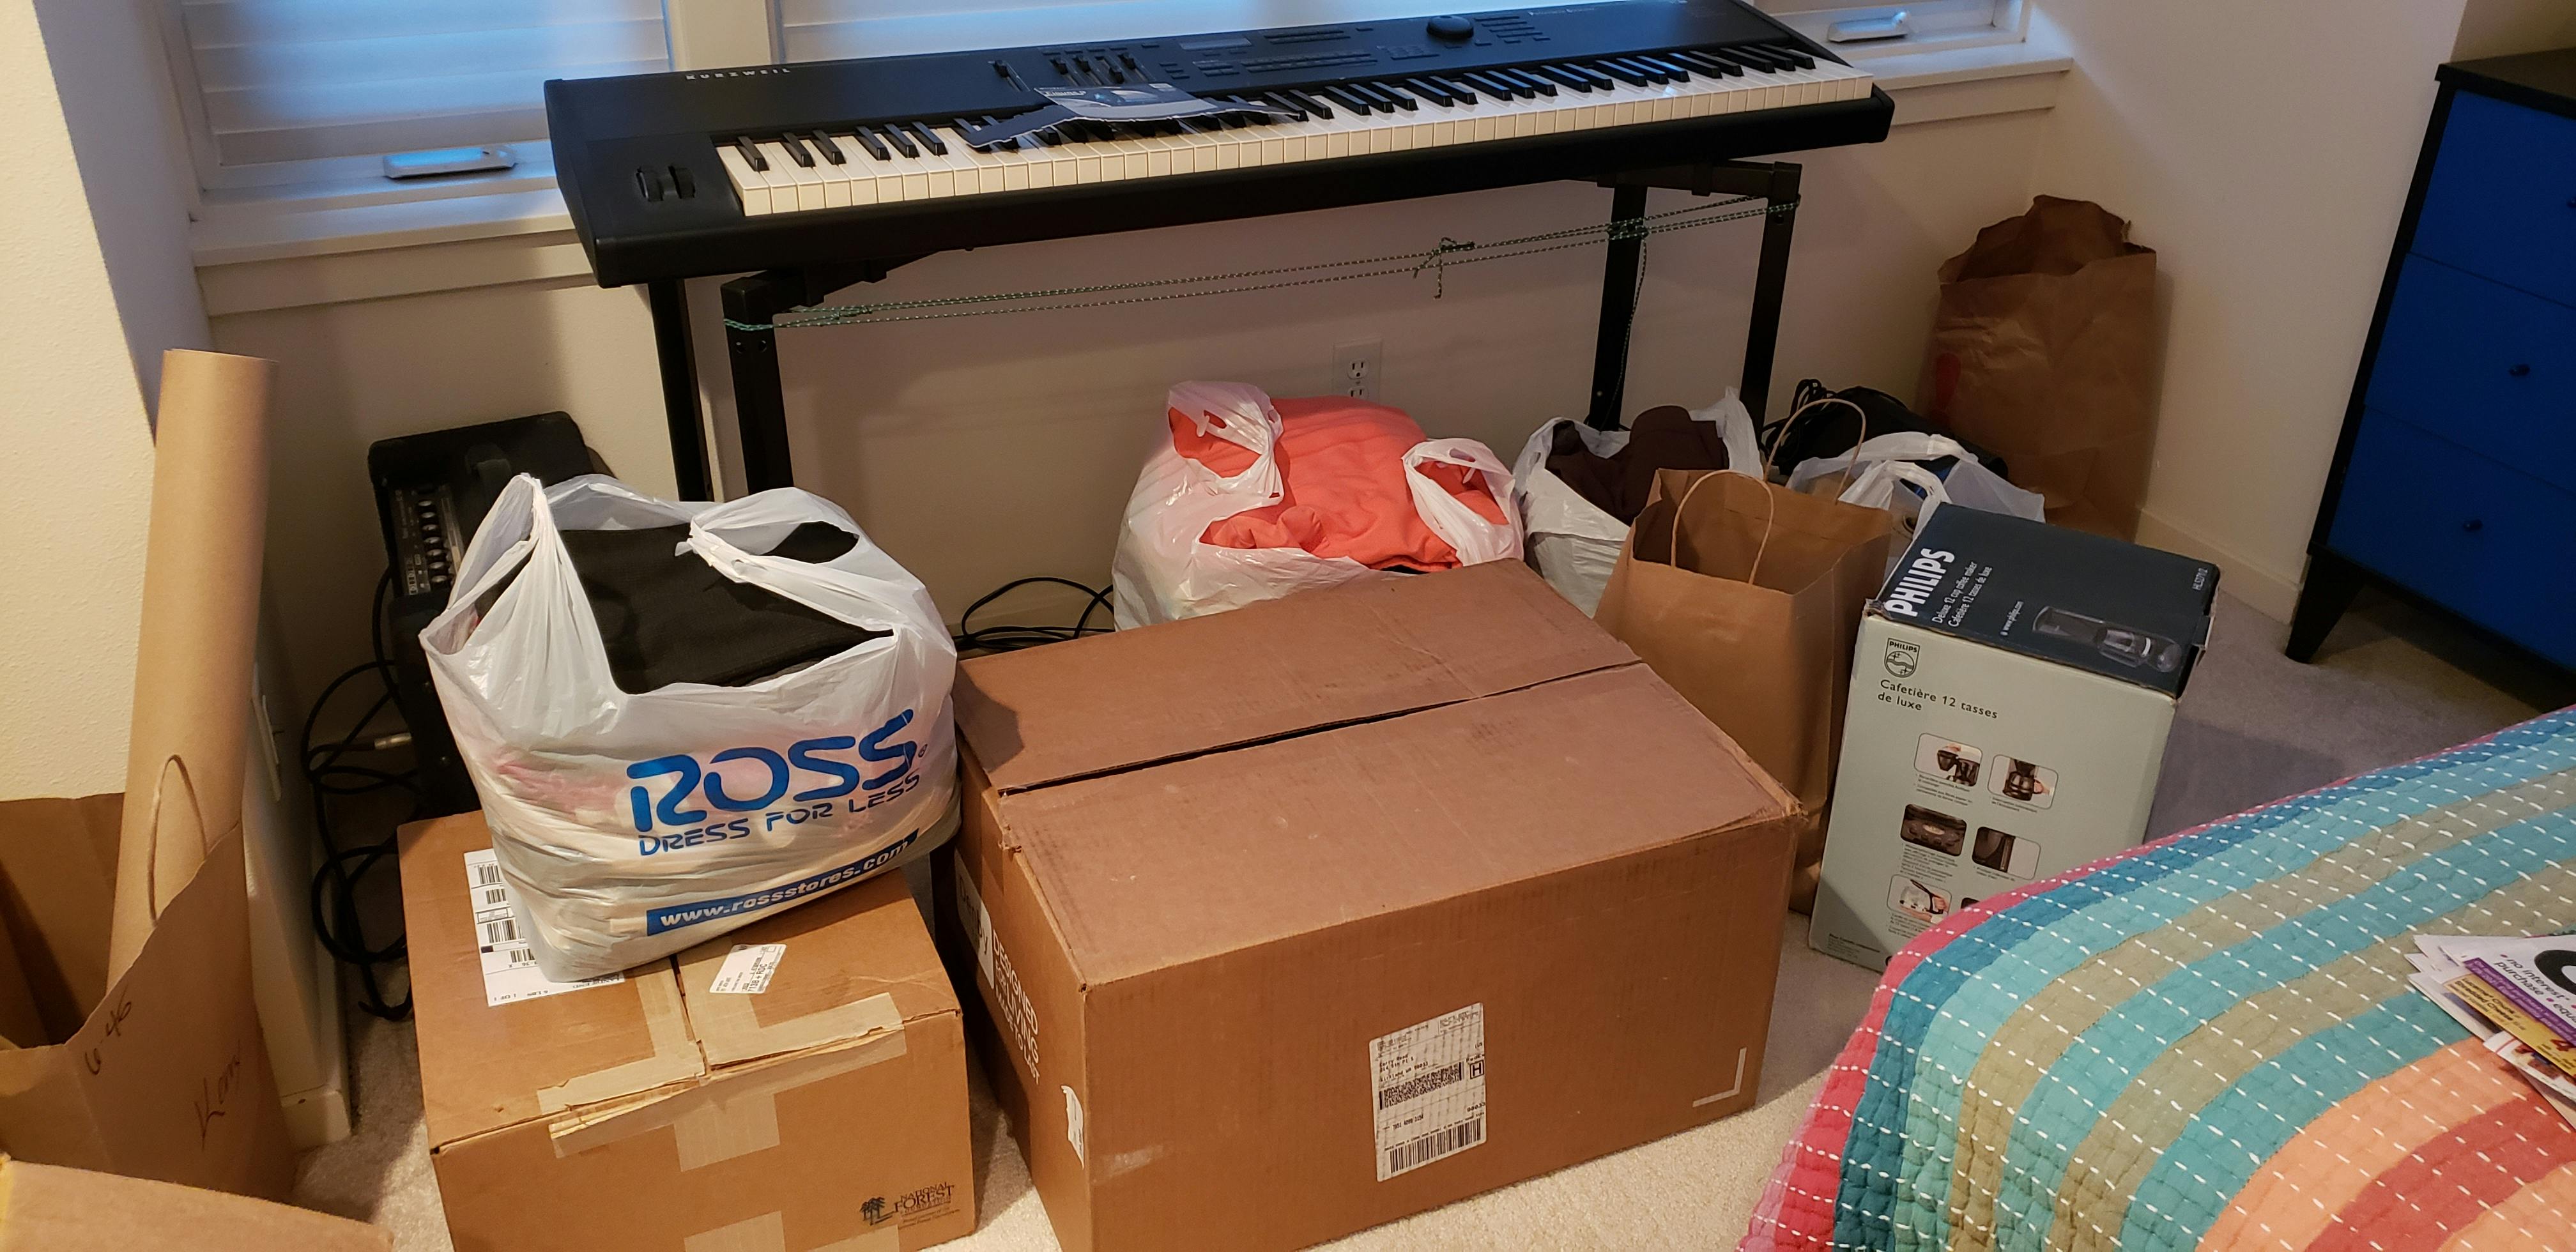 A bunch of boxes and bags full of extra stuff